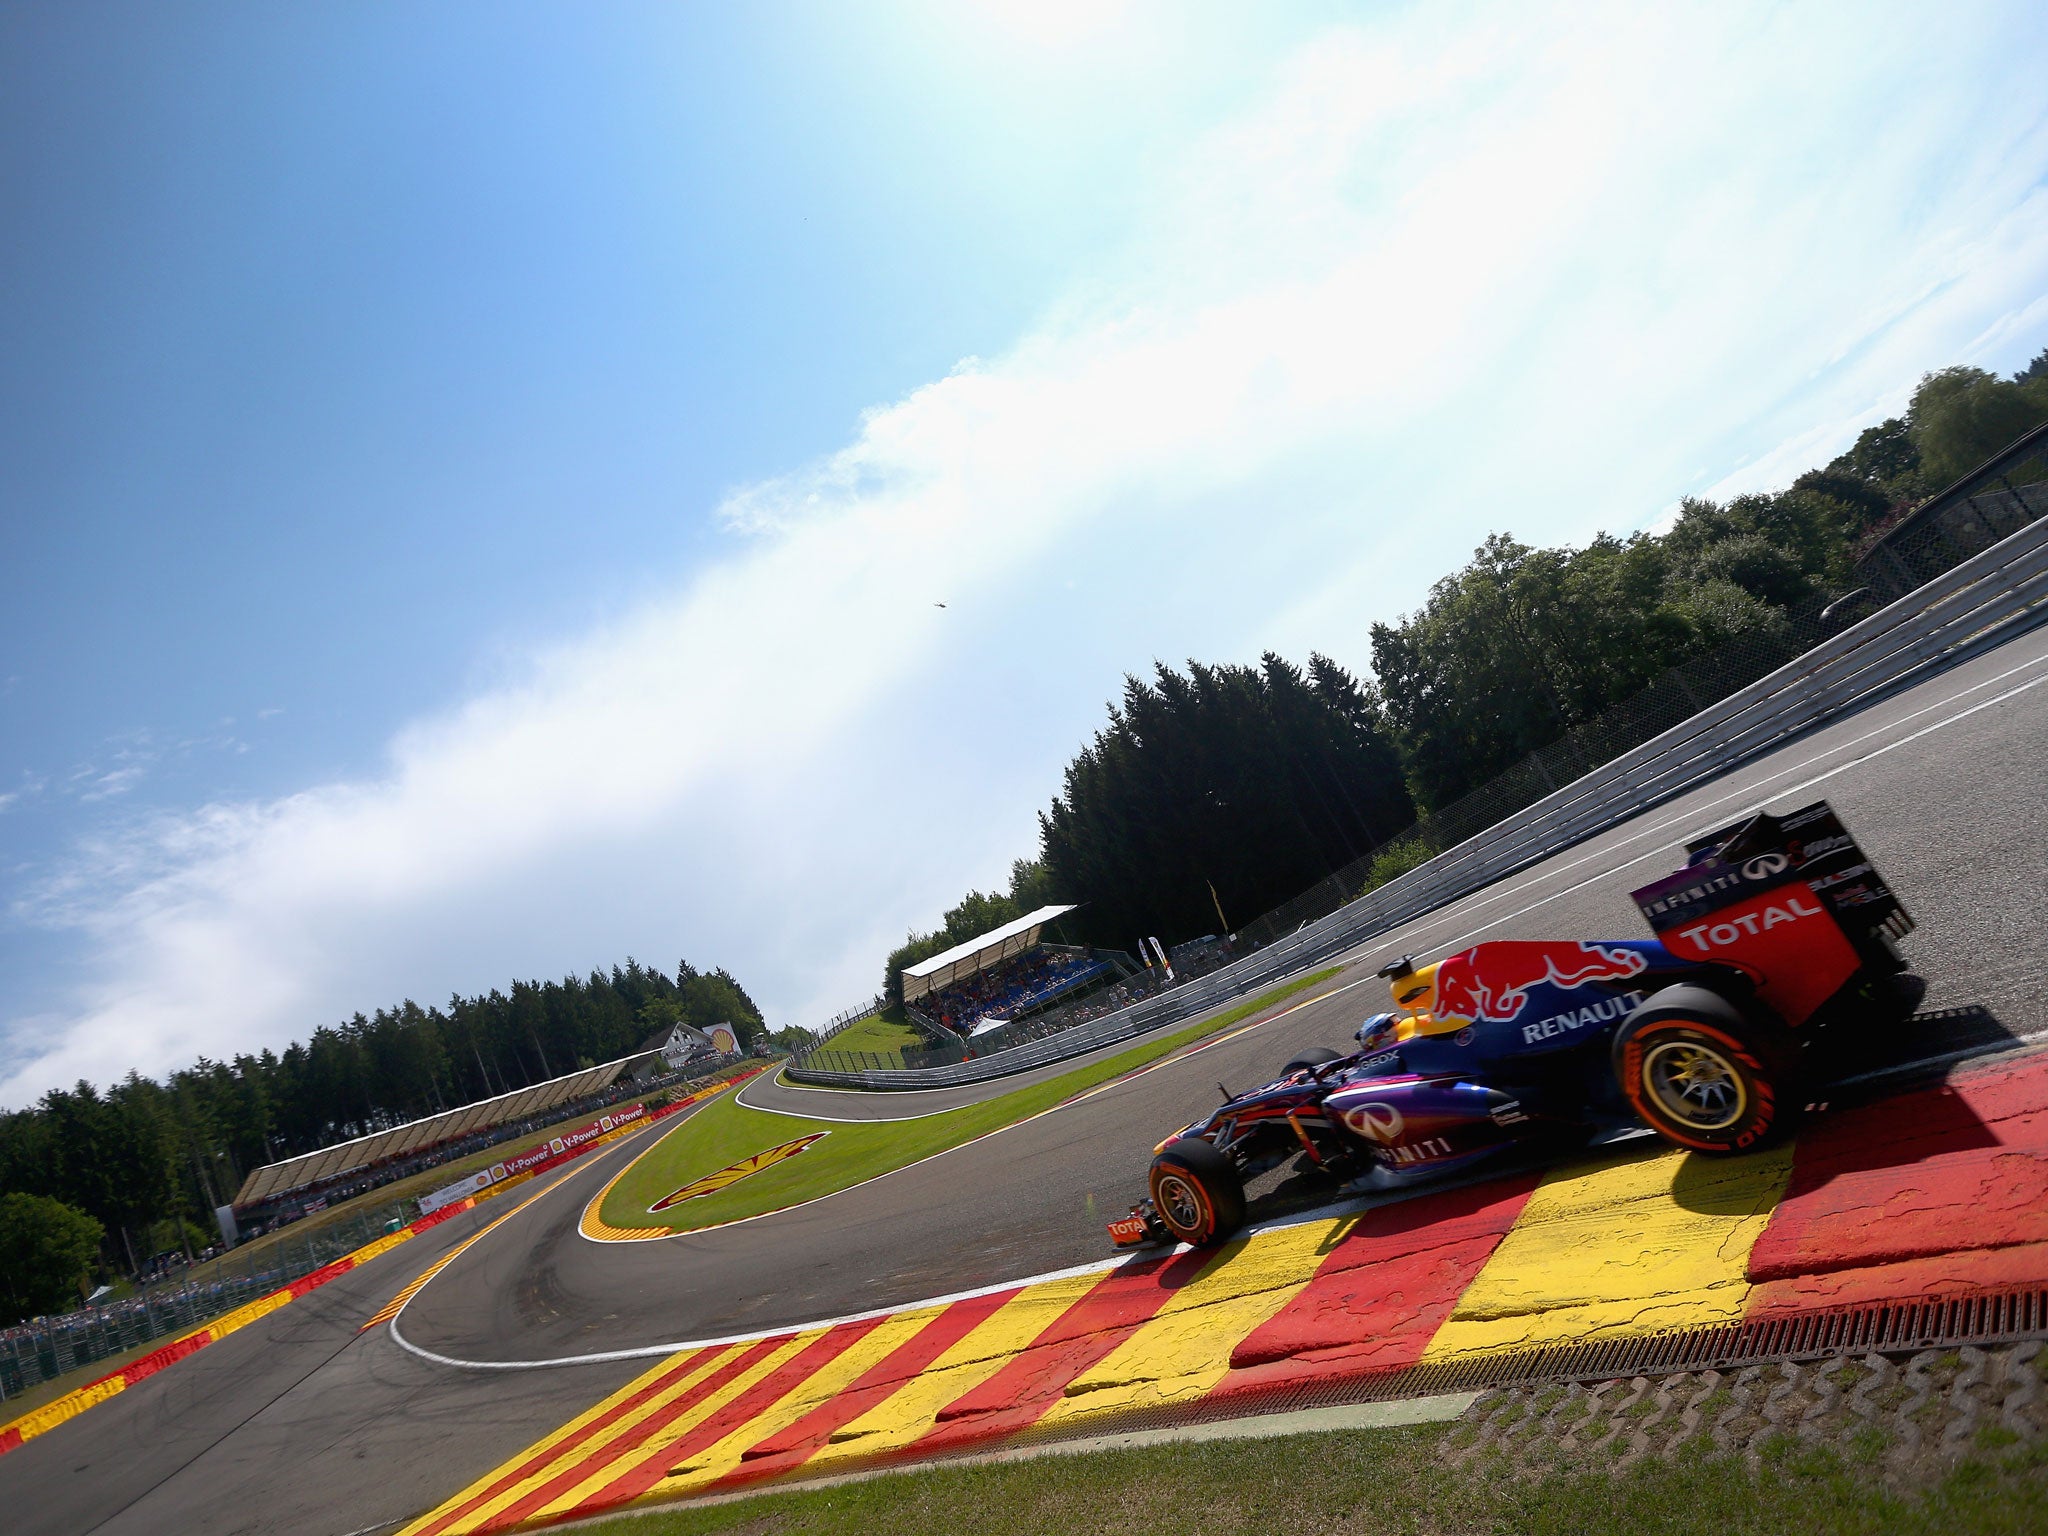 Sebastian Vettel was quickest in practice at Spa-Francorchamps